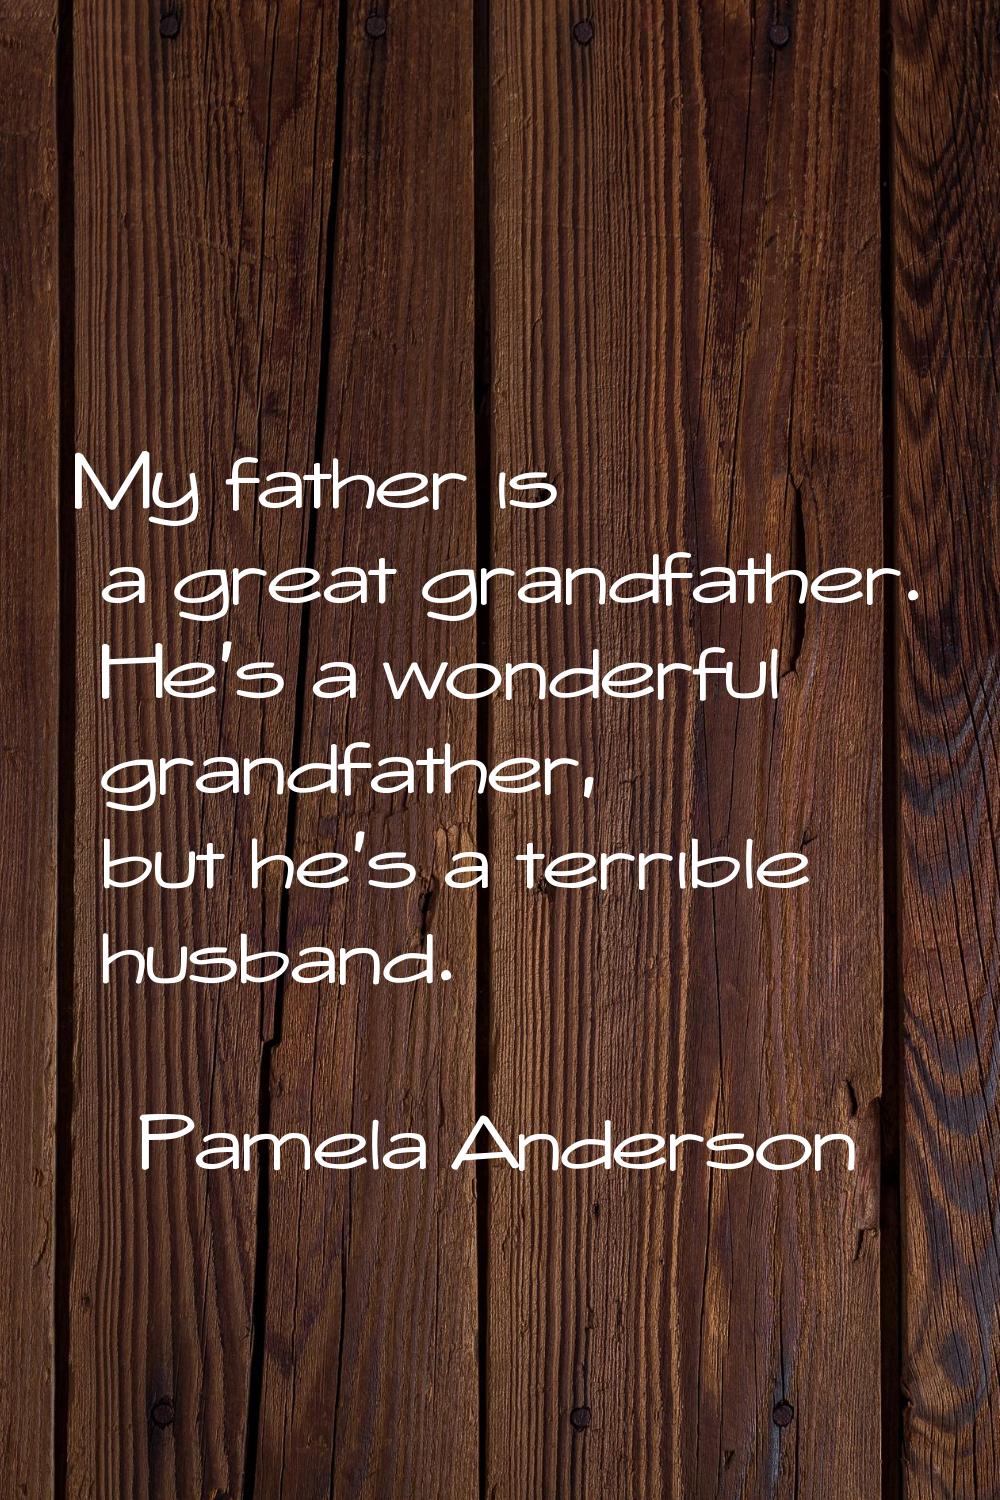 My father is a great grandfather. He's a wonderful grandfather, but he's a terrible husband.